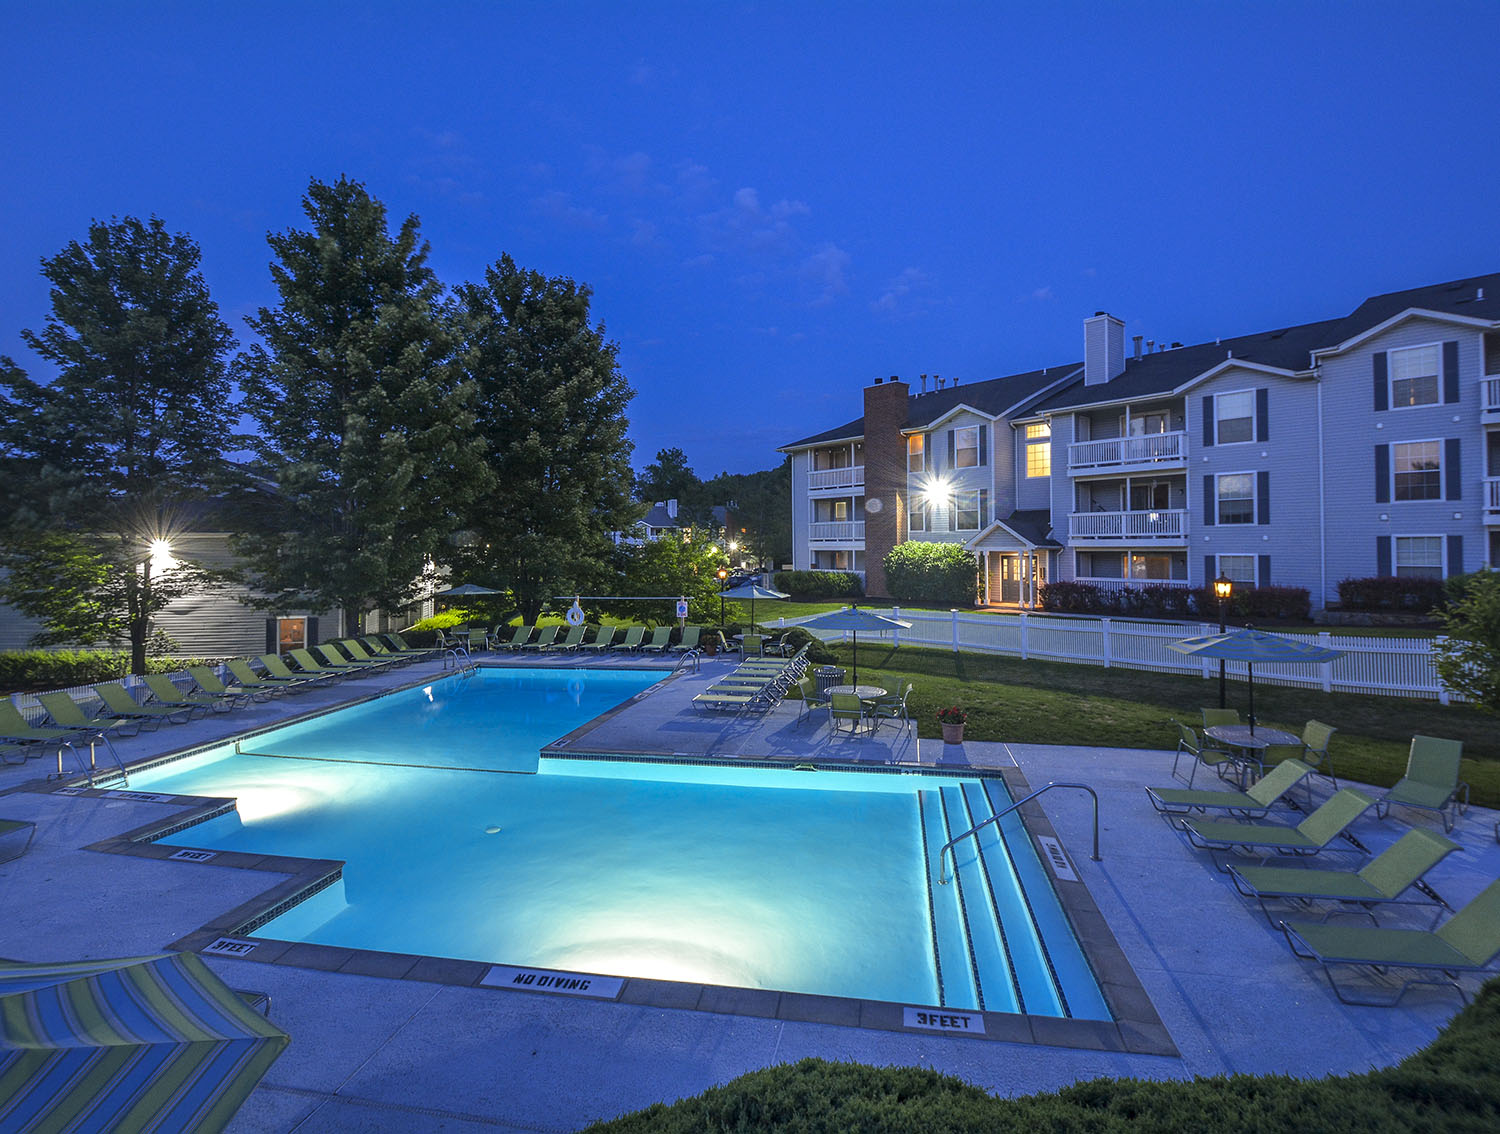 outdoor pool lit up at night